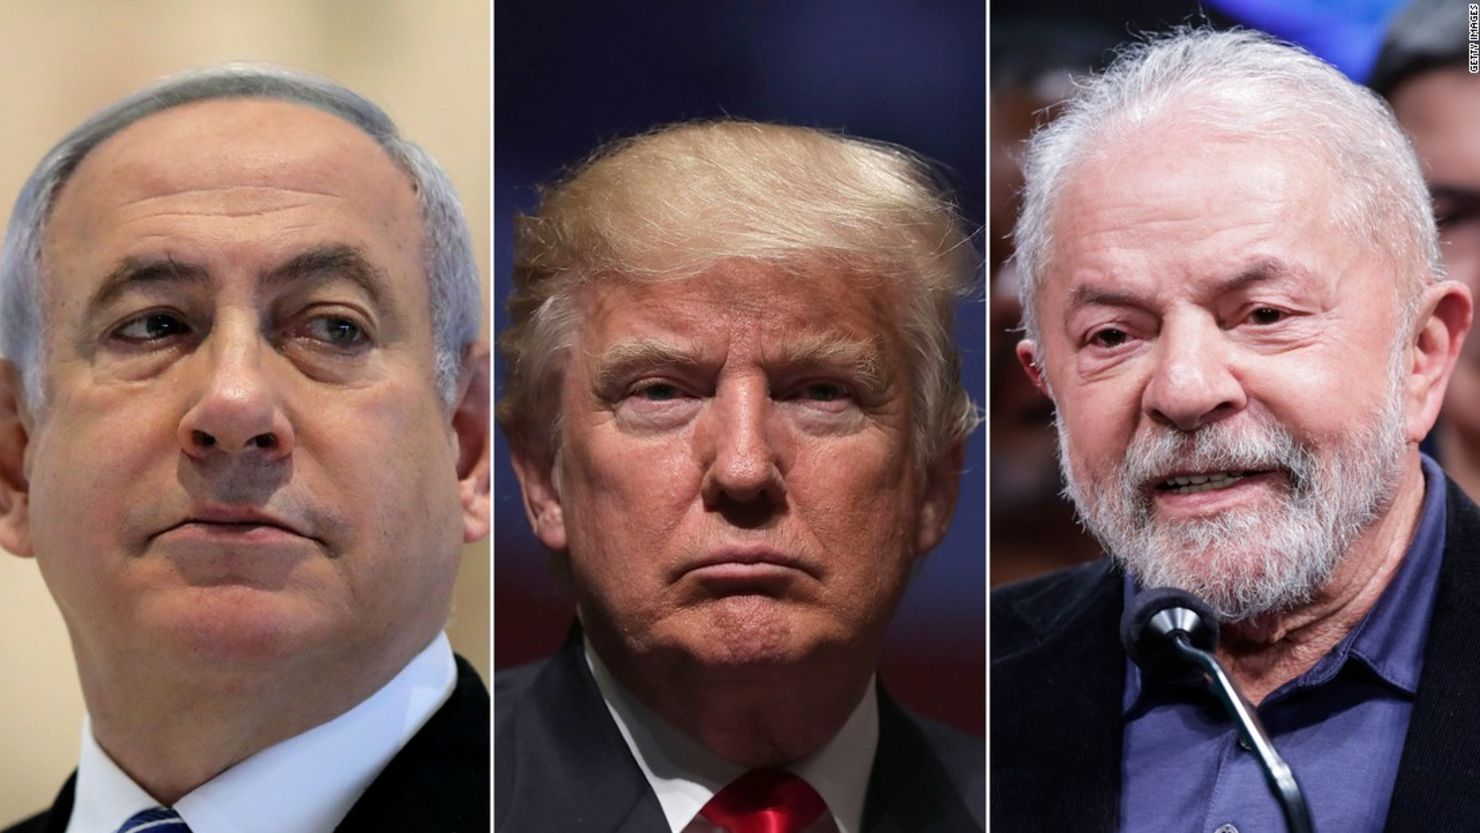 From right, Former Israeli Prime Minister and the head of Likud party, Benjamin Netanyahu, Former US President Donald Trump, and former president of Brazil and candidate of Worker's Party (PT) Luiz Inacio Lula da Silva.